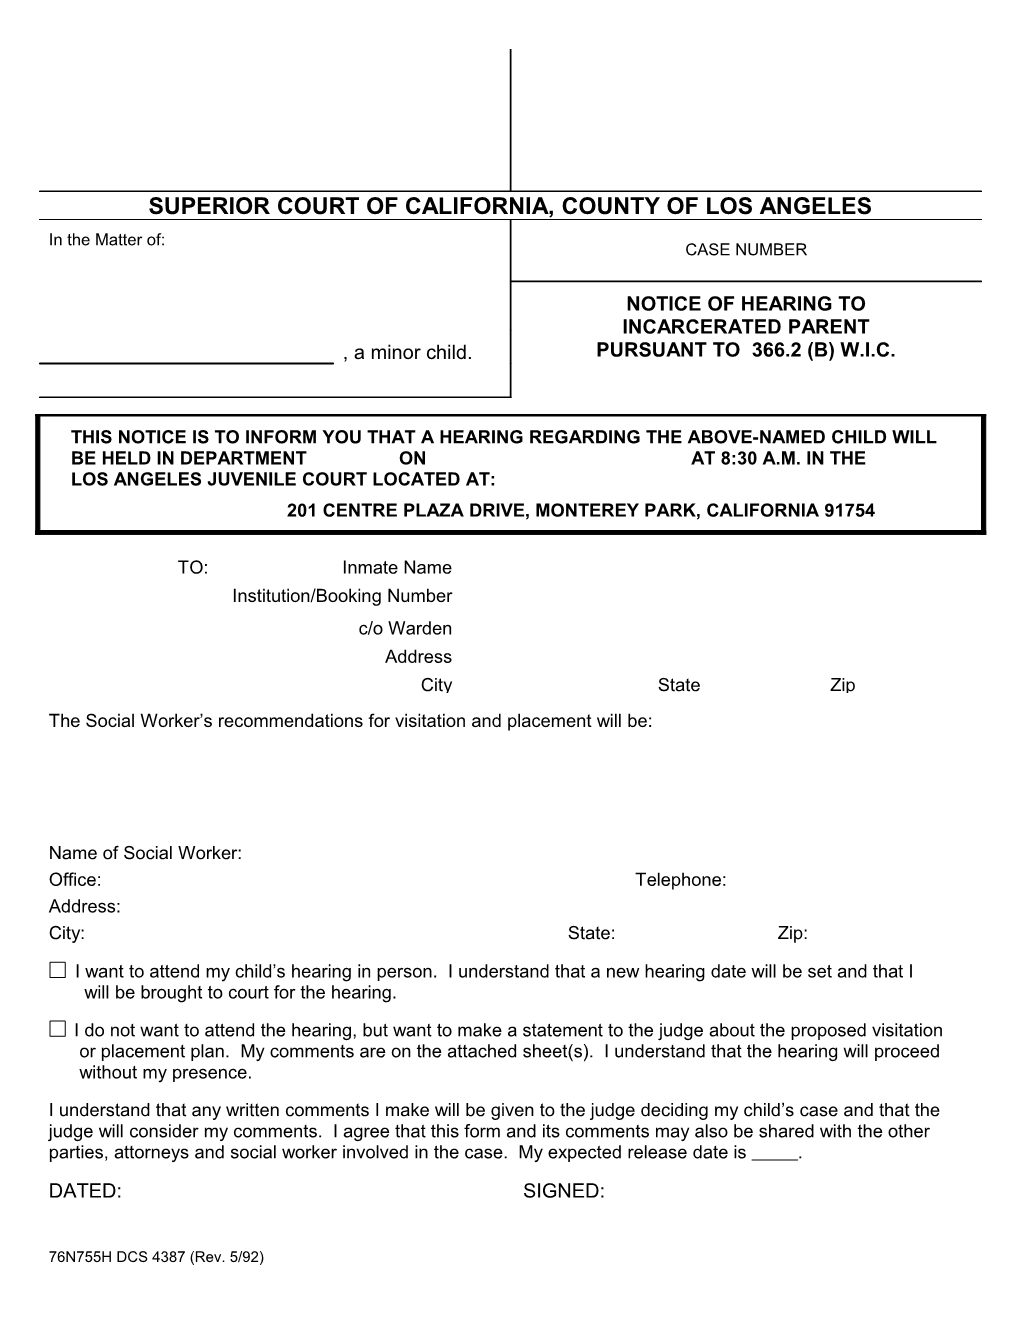 Notice of Hearing to Incarcerated Parent WIC 366.2